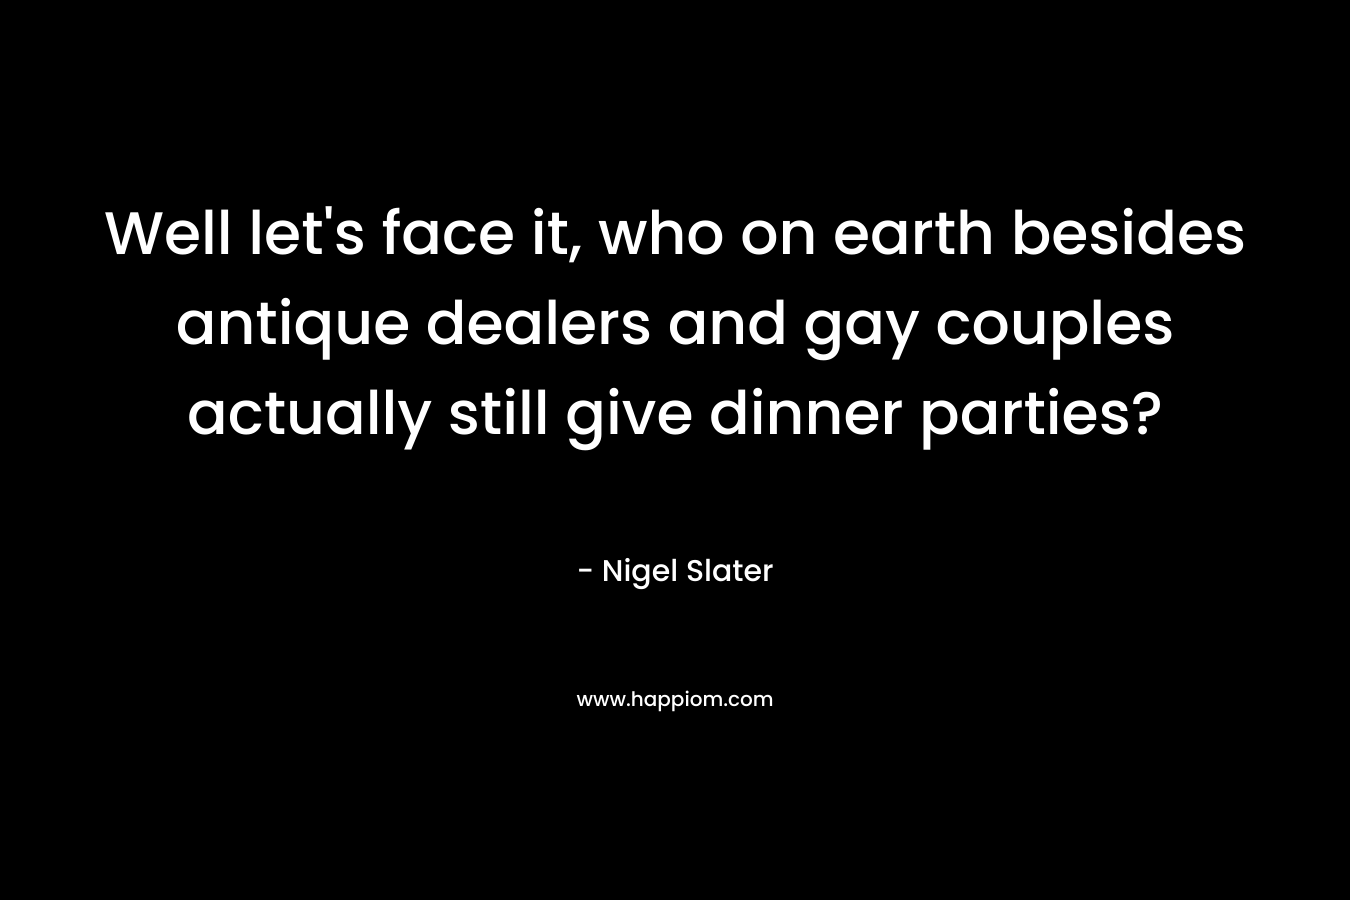 Well let’s face it, who on earth besides antique dealers and gay couples actually still give dinner parties? – Nigel Slater